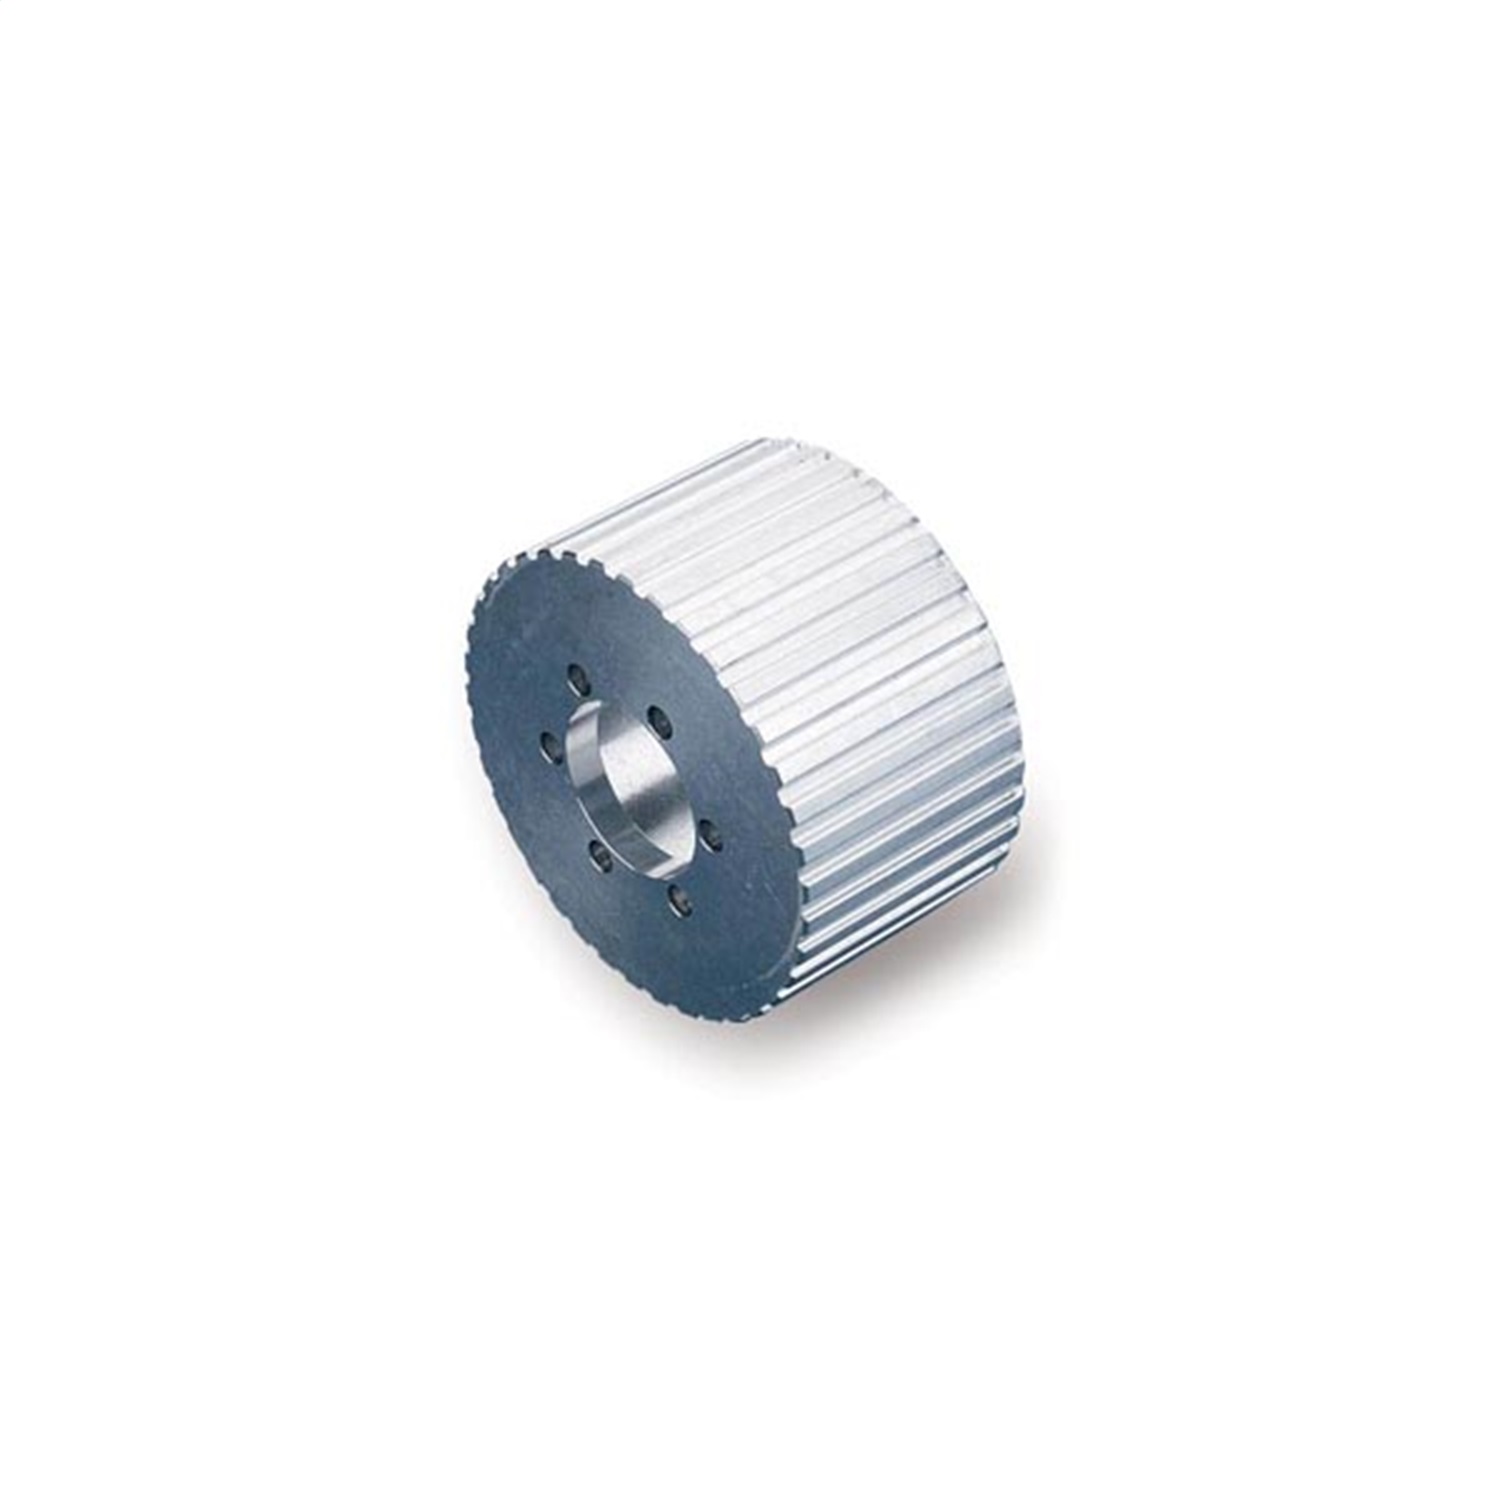 Weiand Weiand 7029-39 0.5 in. Pitch Drive Pulley